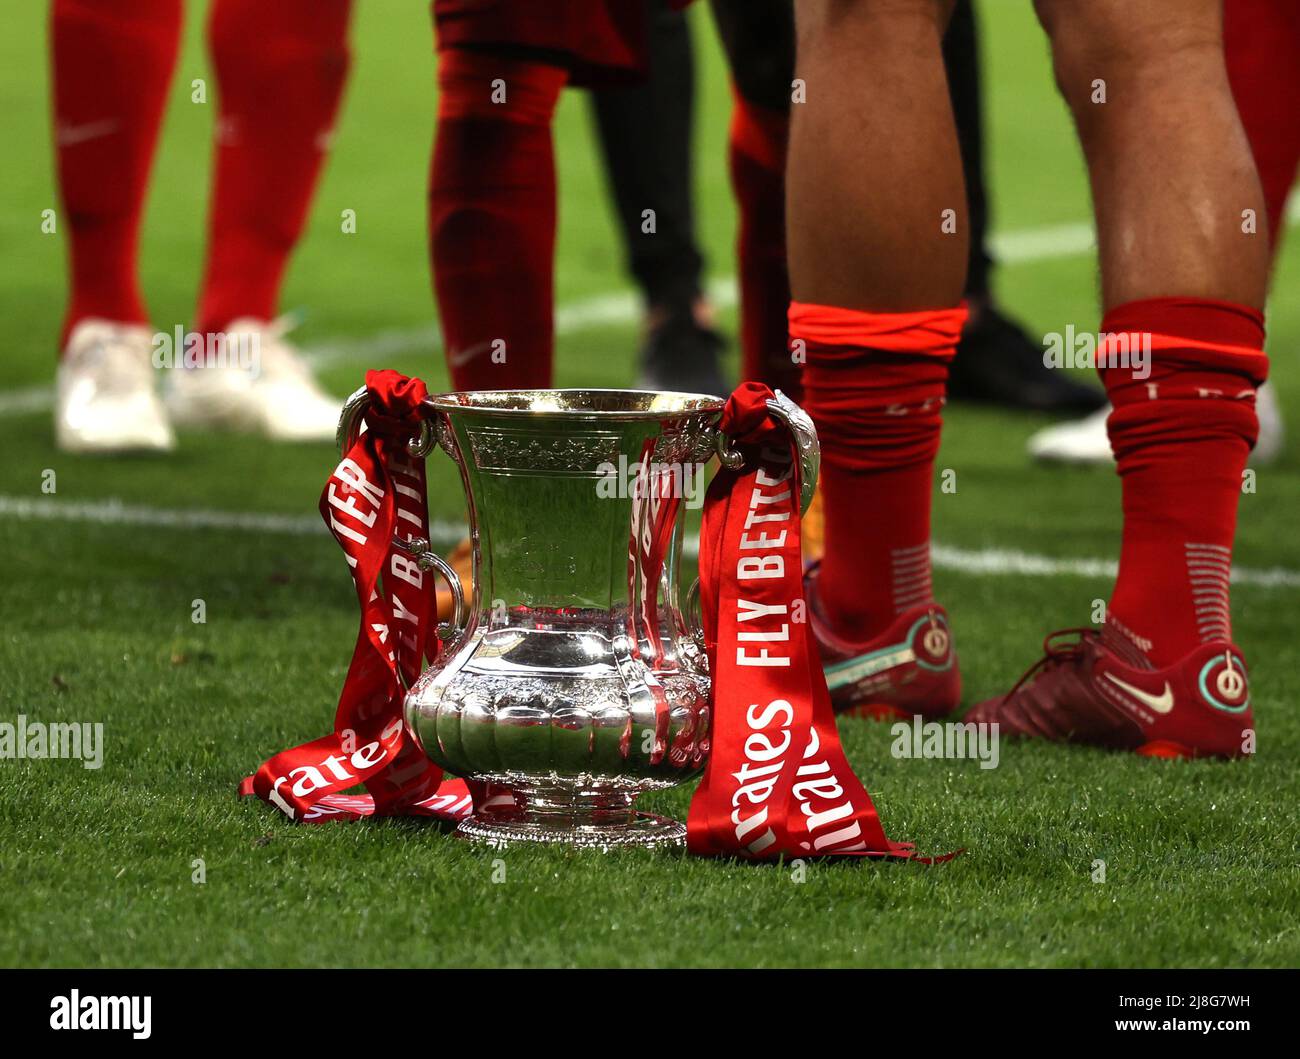 London, UK. 14th May, 2022. The FA Cup at the Emirates FA Cup Final with Chelsea v Liverpool at Wembley Stadium, London, UK, on May 14, 2022 Credit: Paul Marriott/Alamy Live News Stock Photo